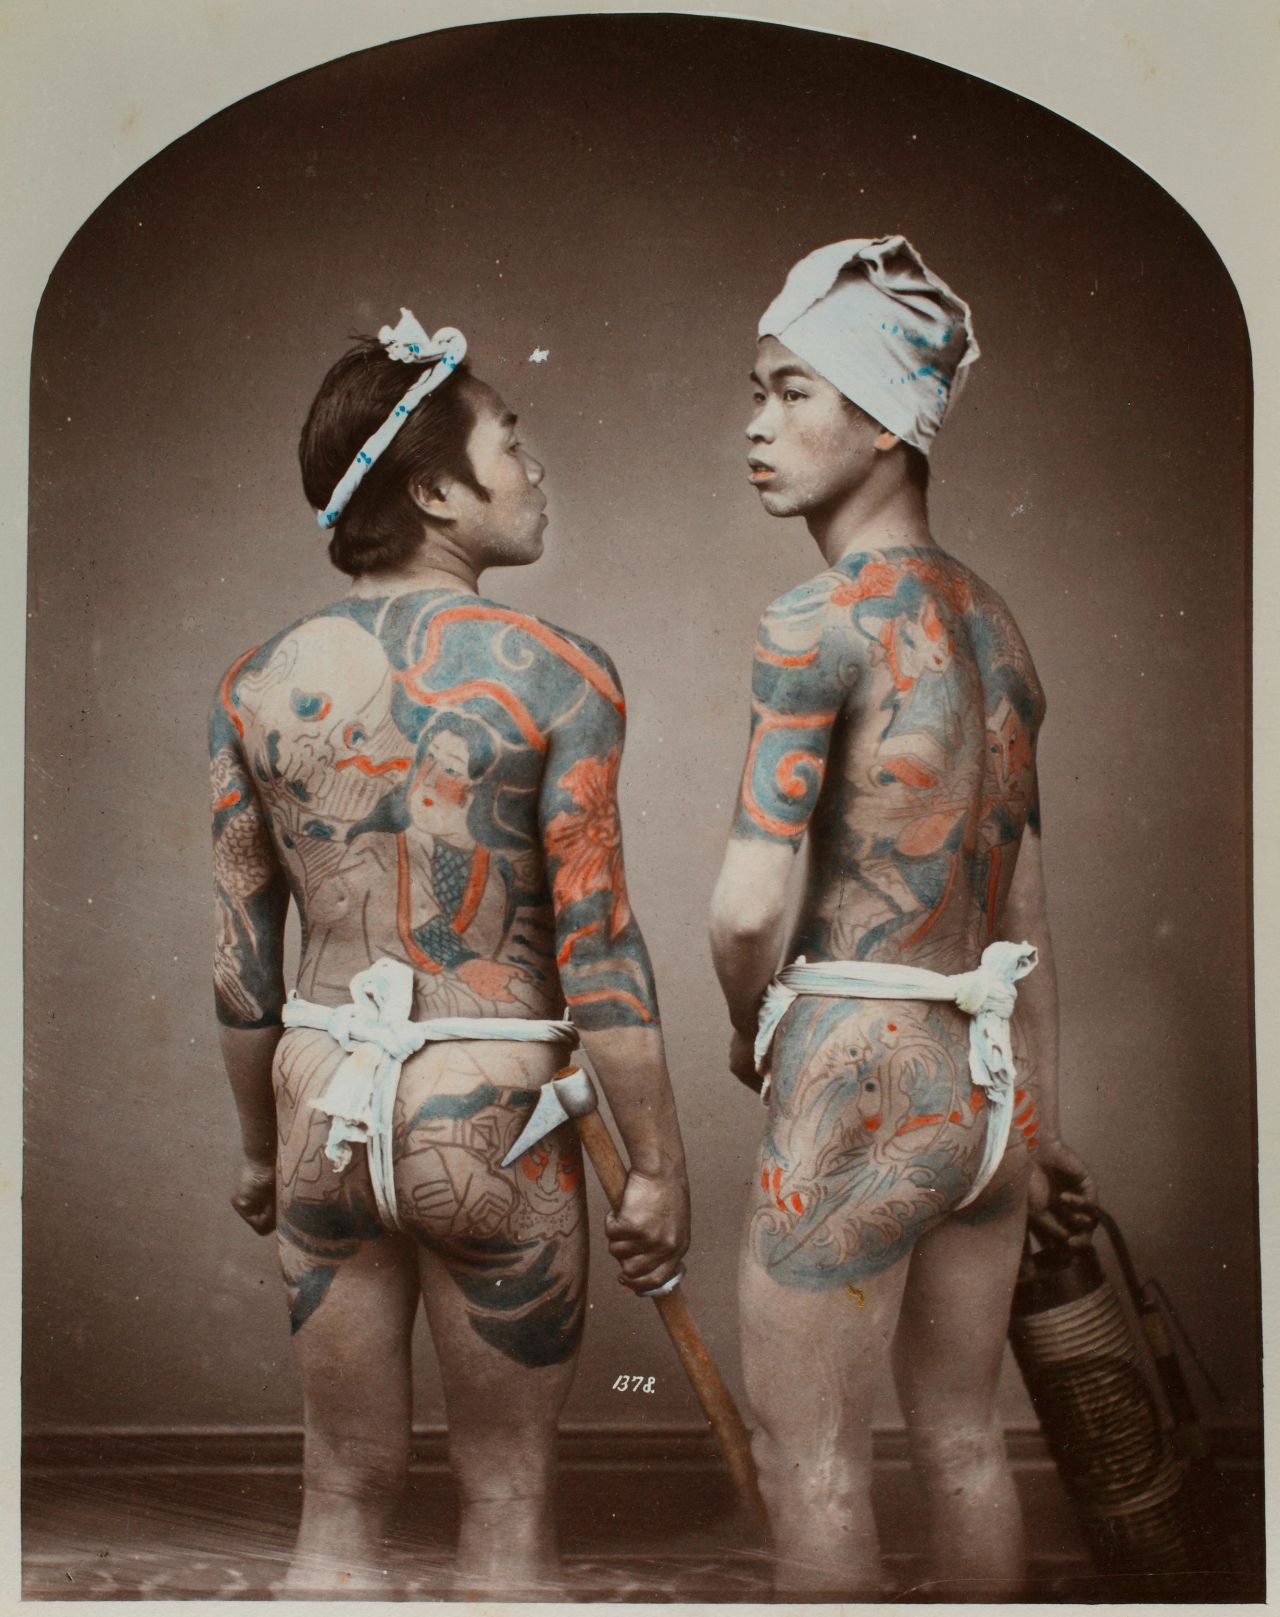 Italian photographer Felice Beato captured Japanese men tattooed with hand-carved tattoos in the 1880s.